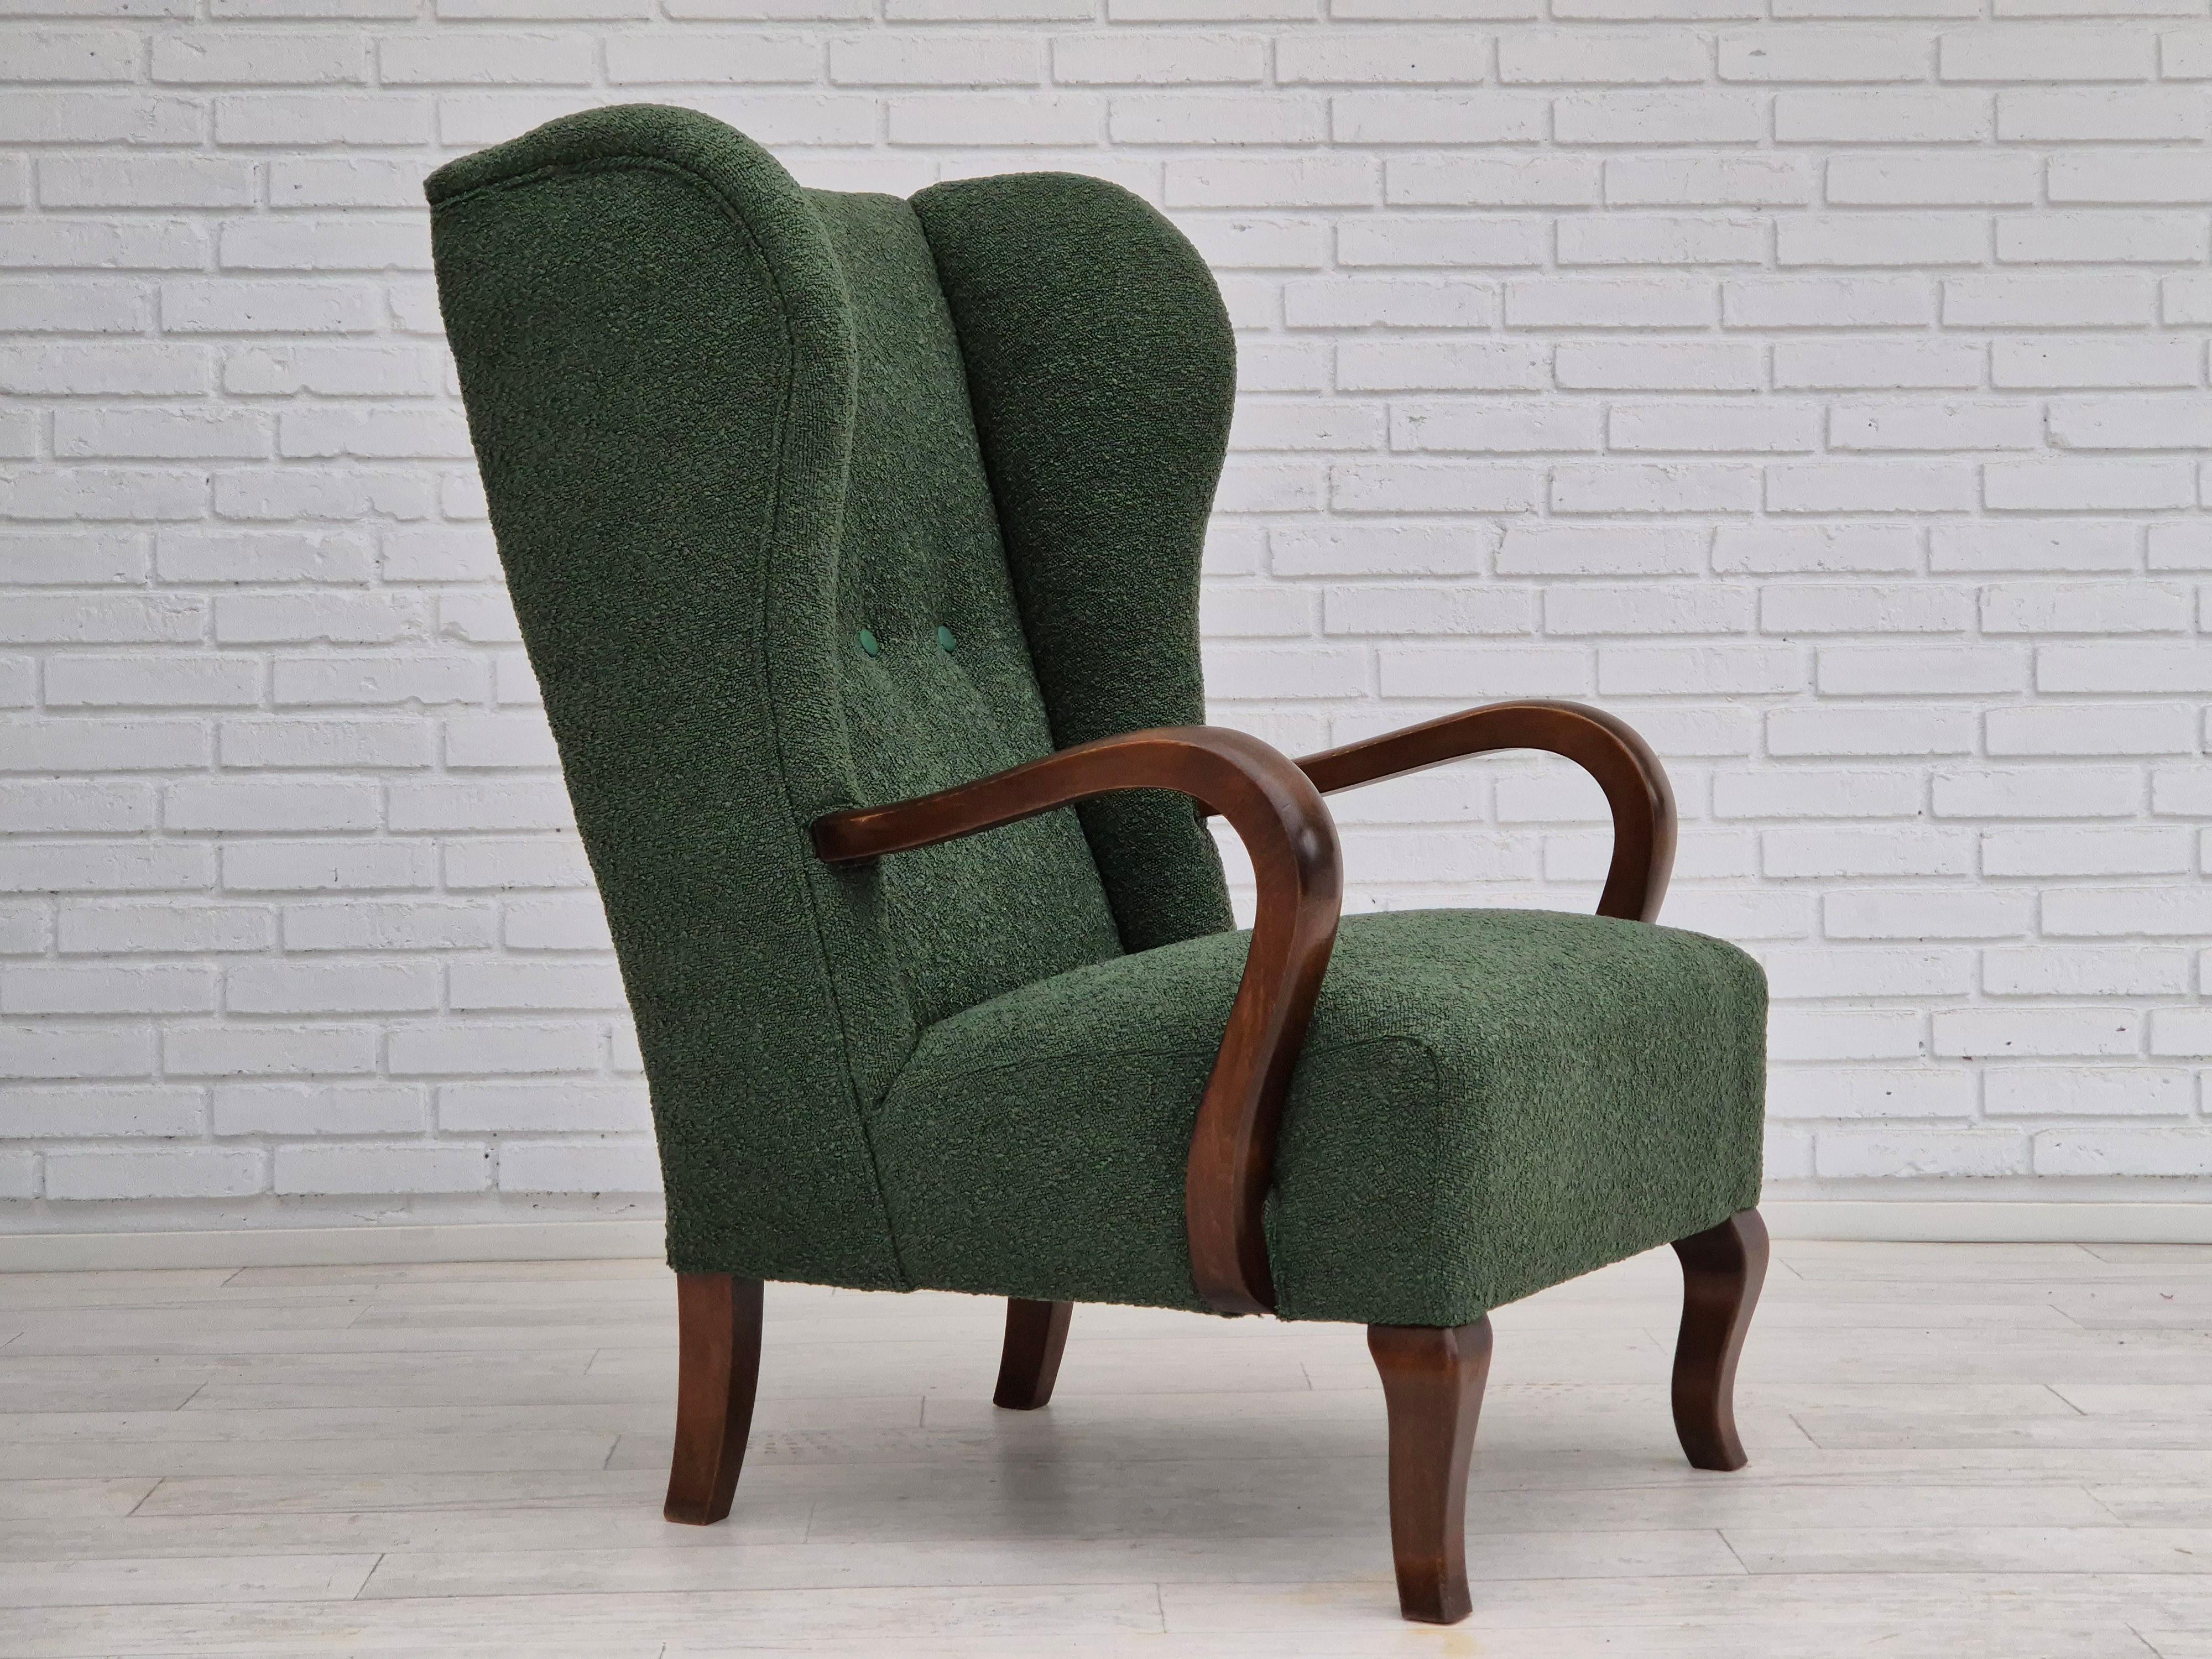 1950s, Danish design. Reupholstered high-back wingback chair in quality bottle green furniture fabric. Faux leather green buttons. Renewed leg and armrest in beech wood. Brass springs in the seat and back. Manufactured by a Danish furniture